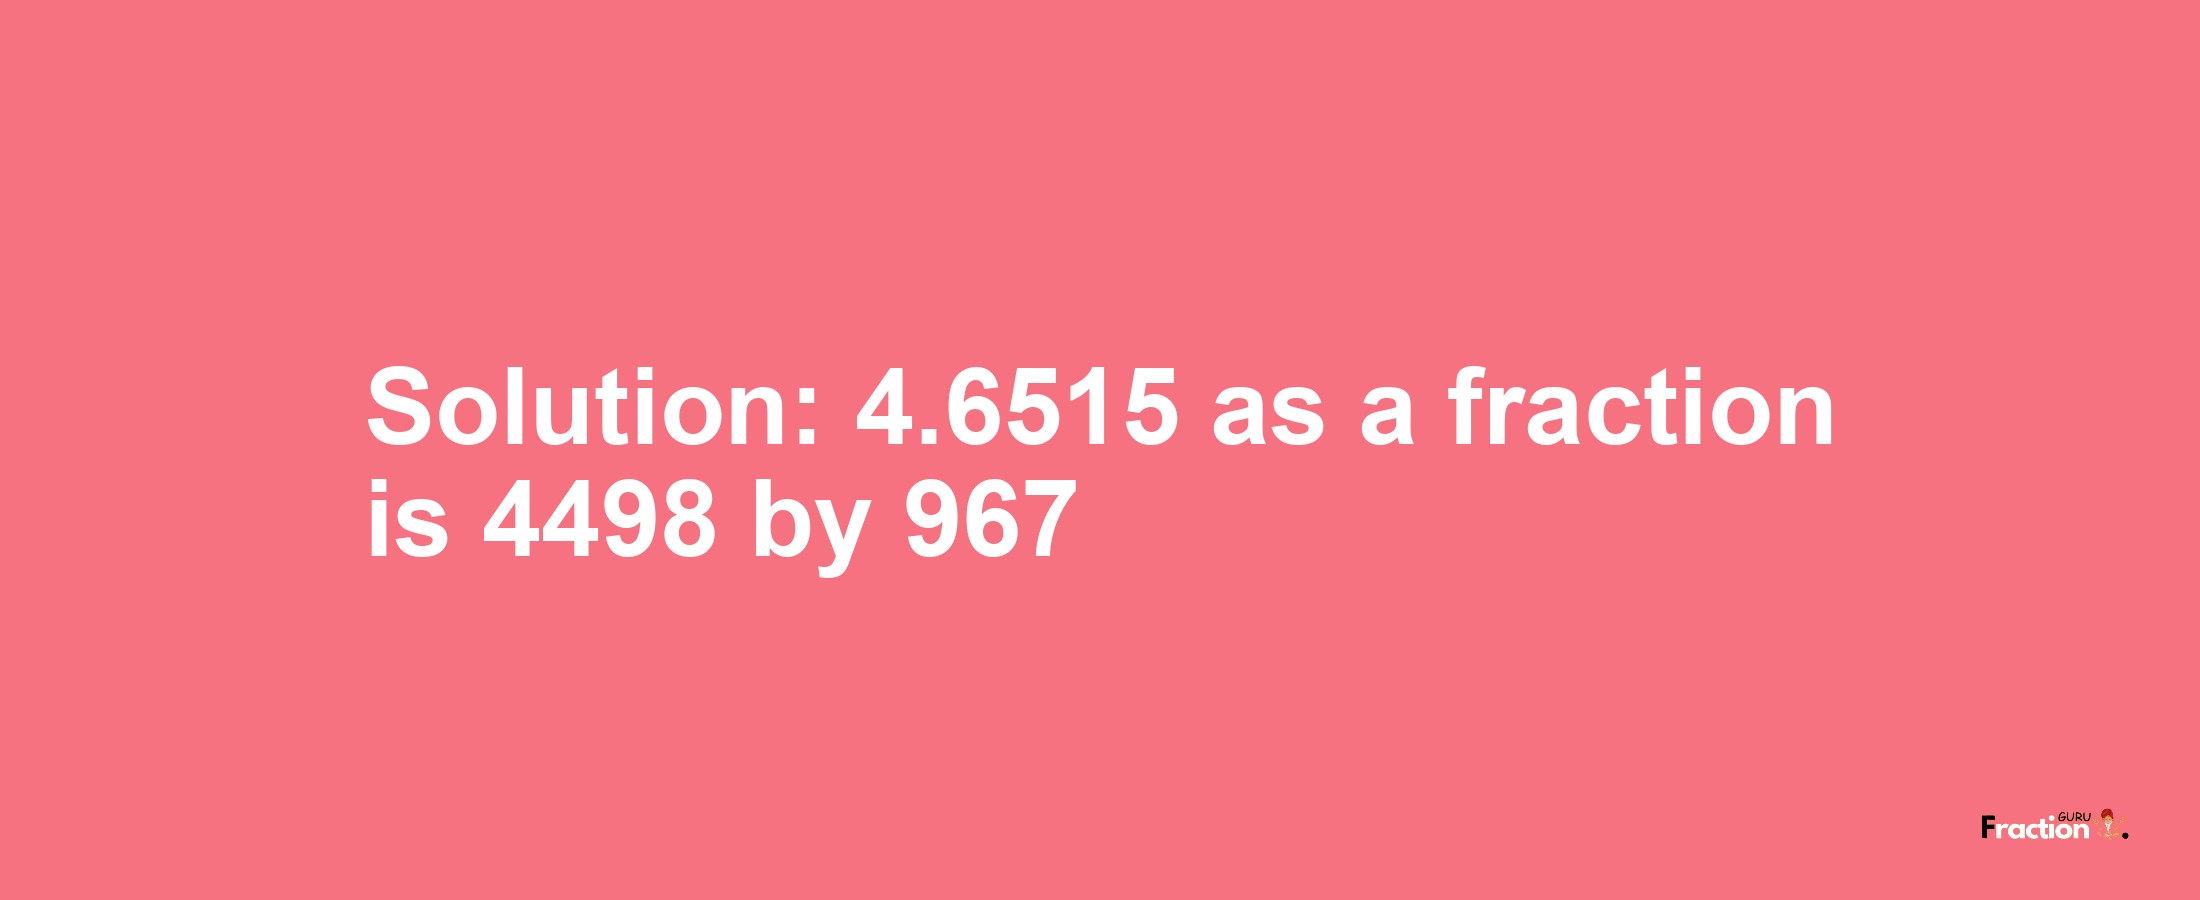 Solution:4.6515 as a fraction is 4498/967